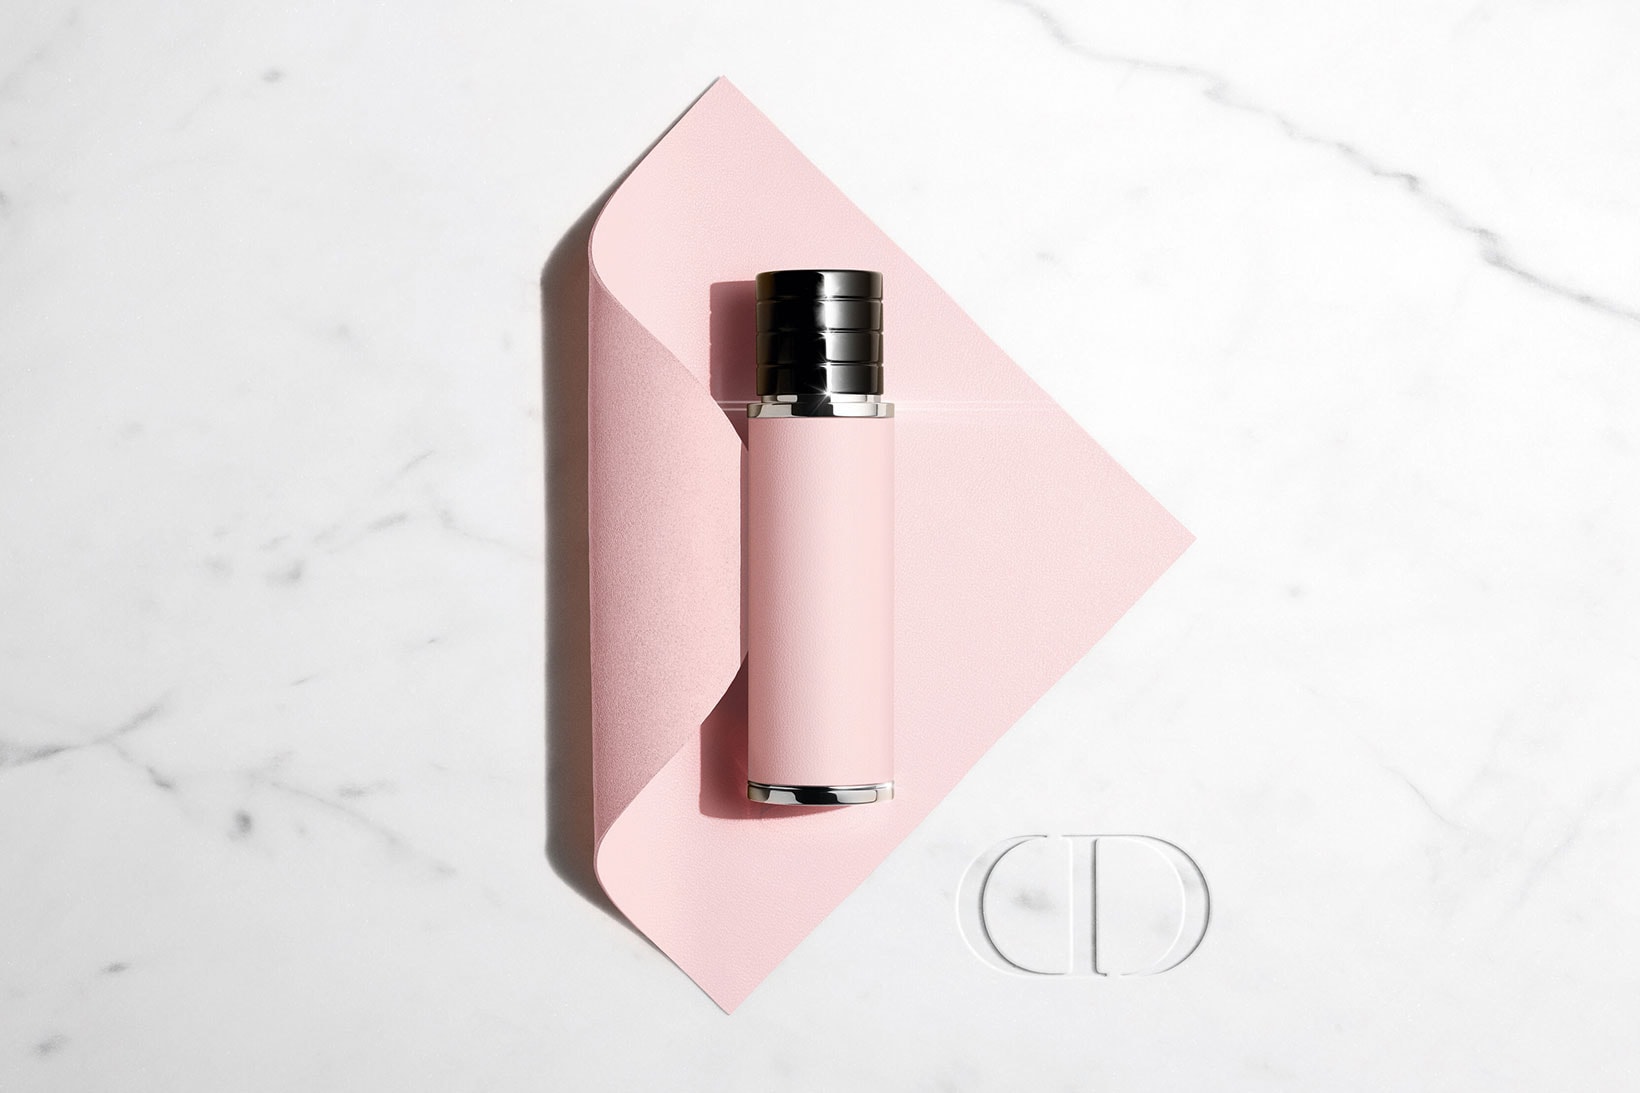 Dior travel spray bottles are refillable! ✨🤍 #dior #diorbeauty